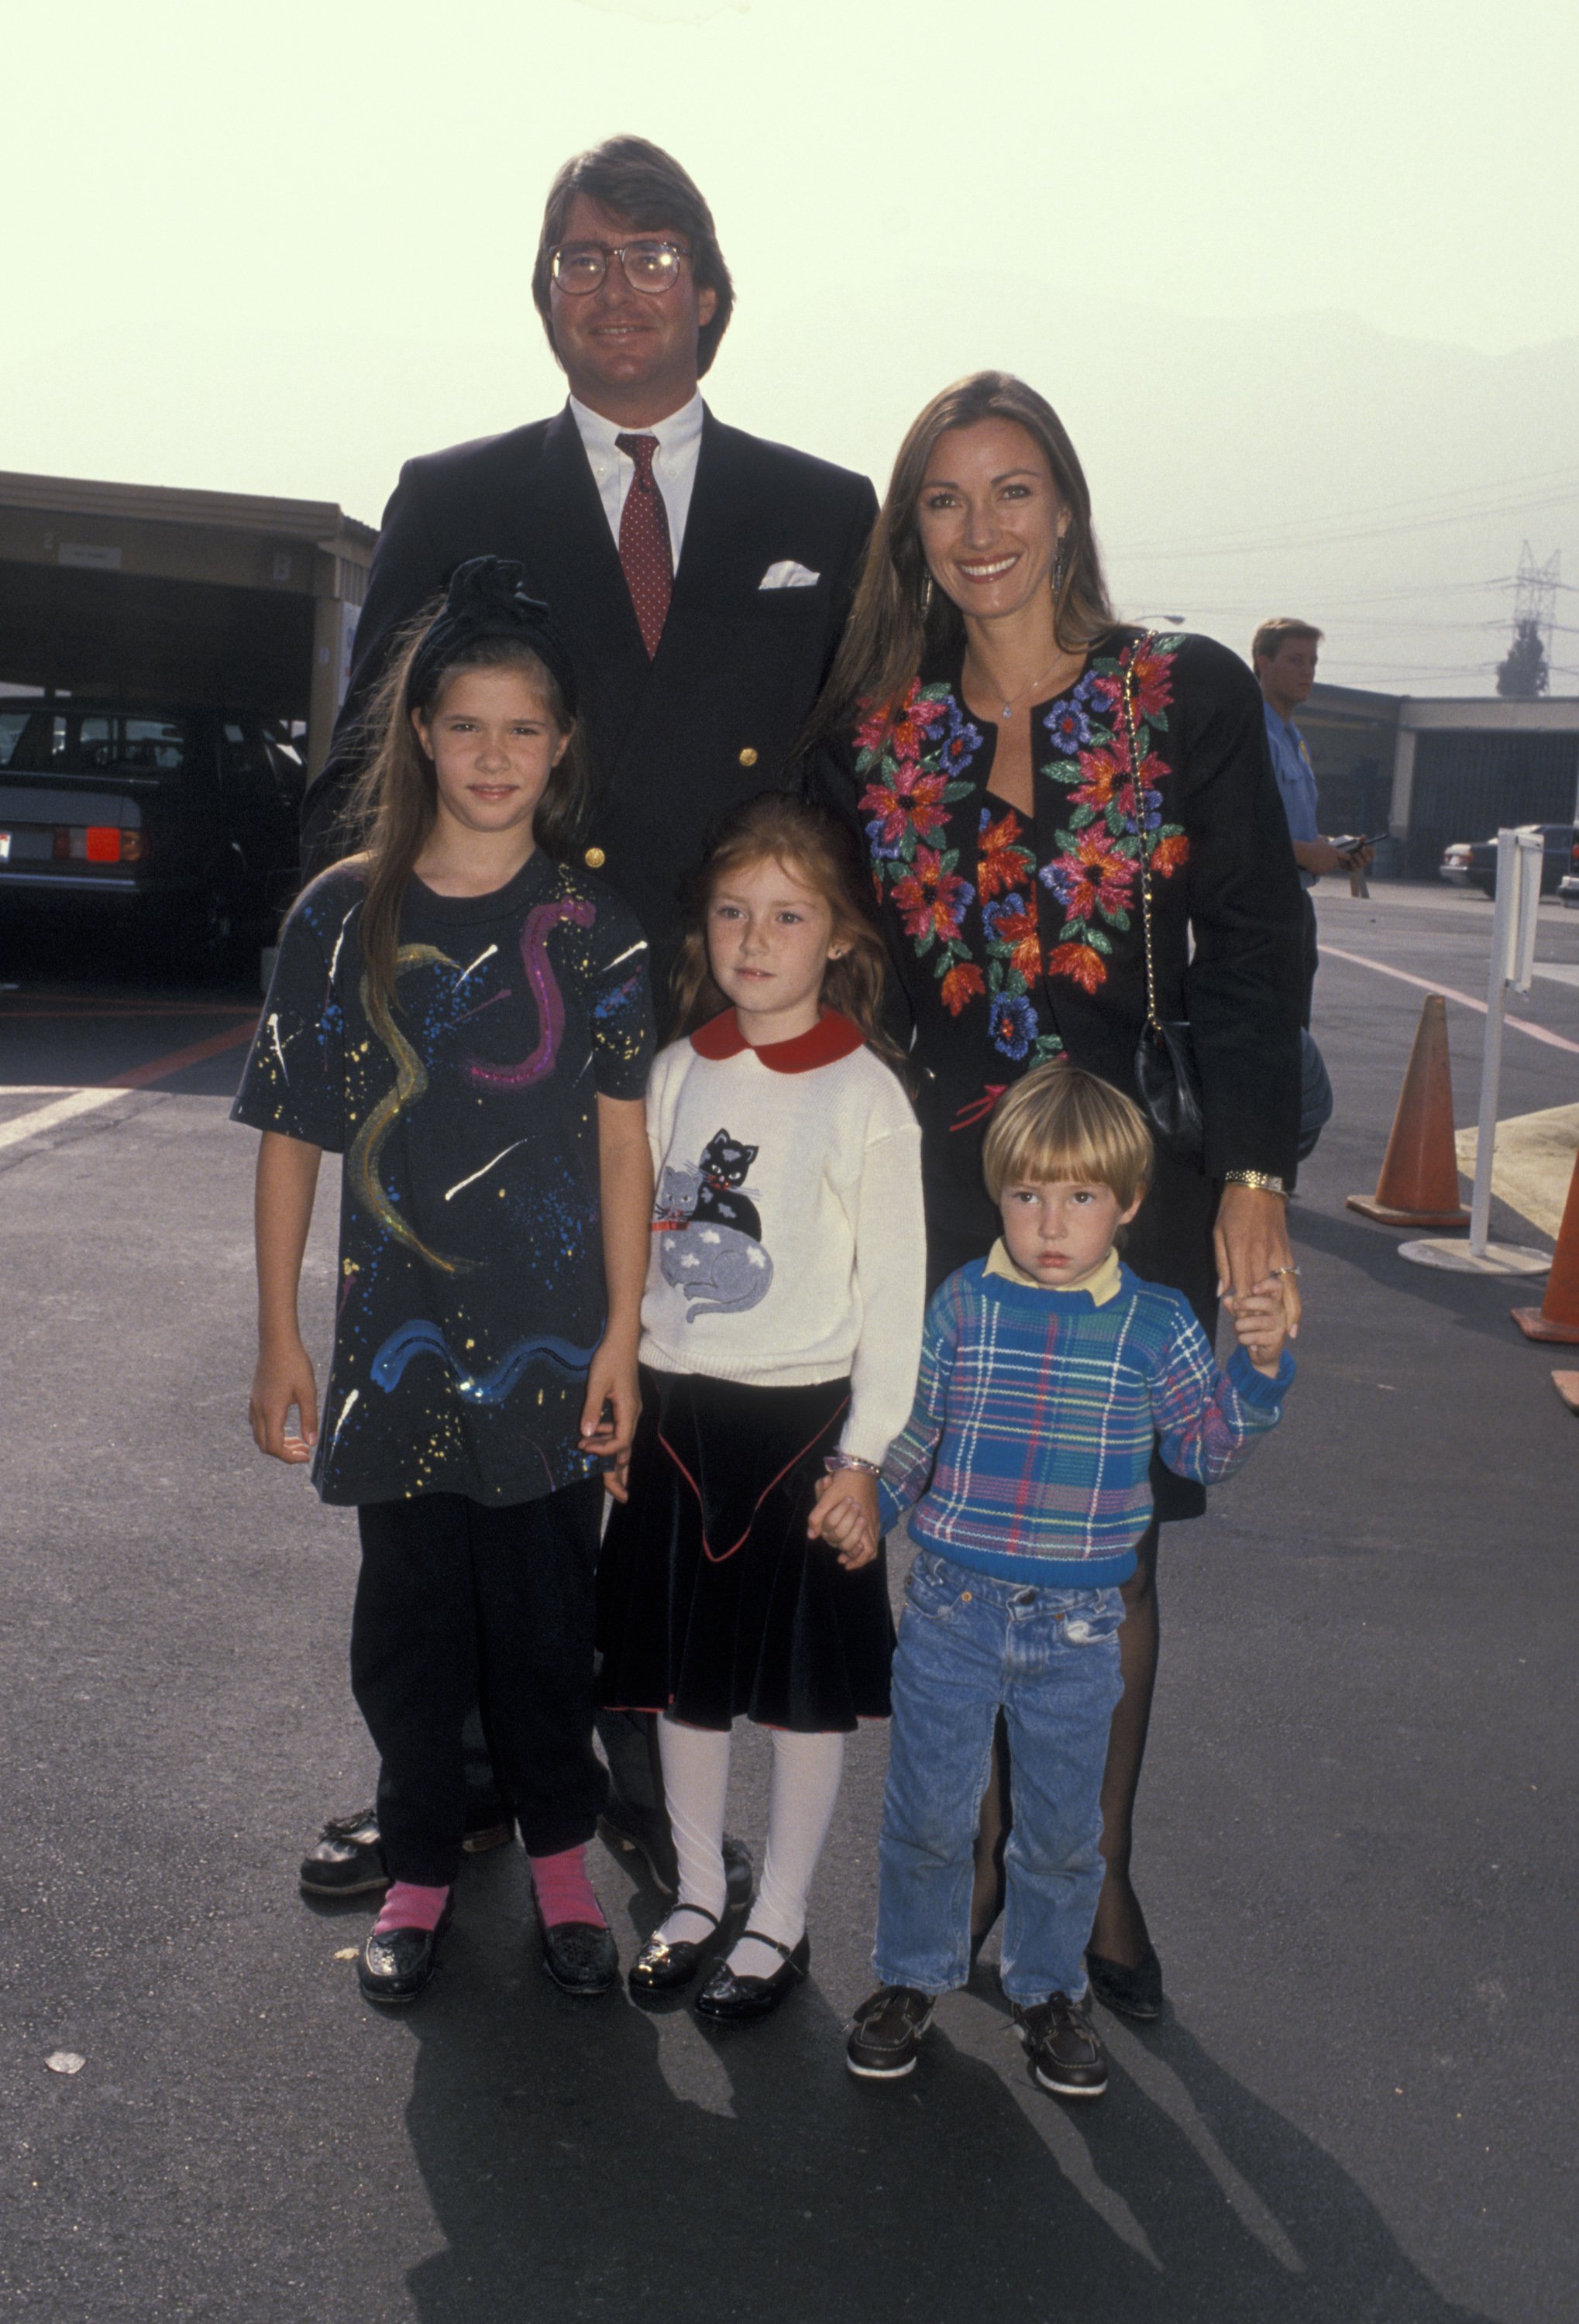 David Flynn, Jane Seymour with their children Jennifer, Katherine, and Sean Flynn at the "Oliver & Company" Los Angeles premiere on November 6, 1988. | Source: Getty Images